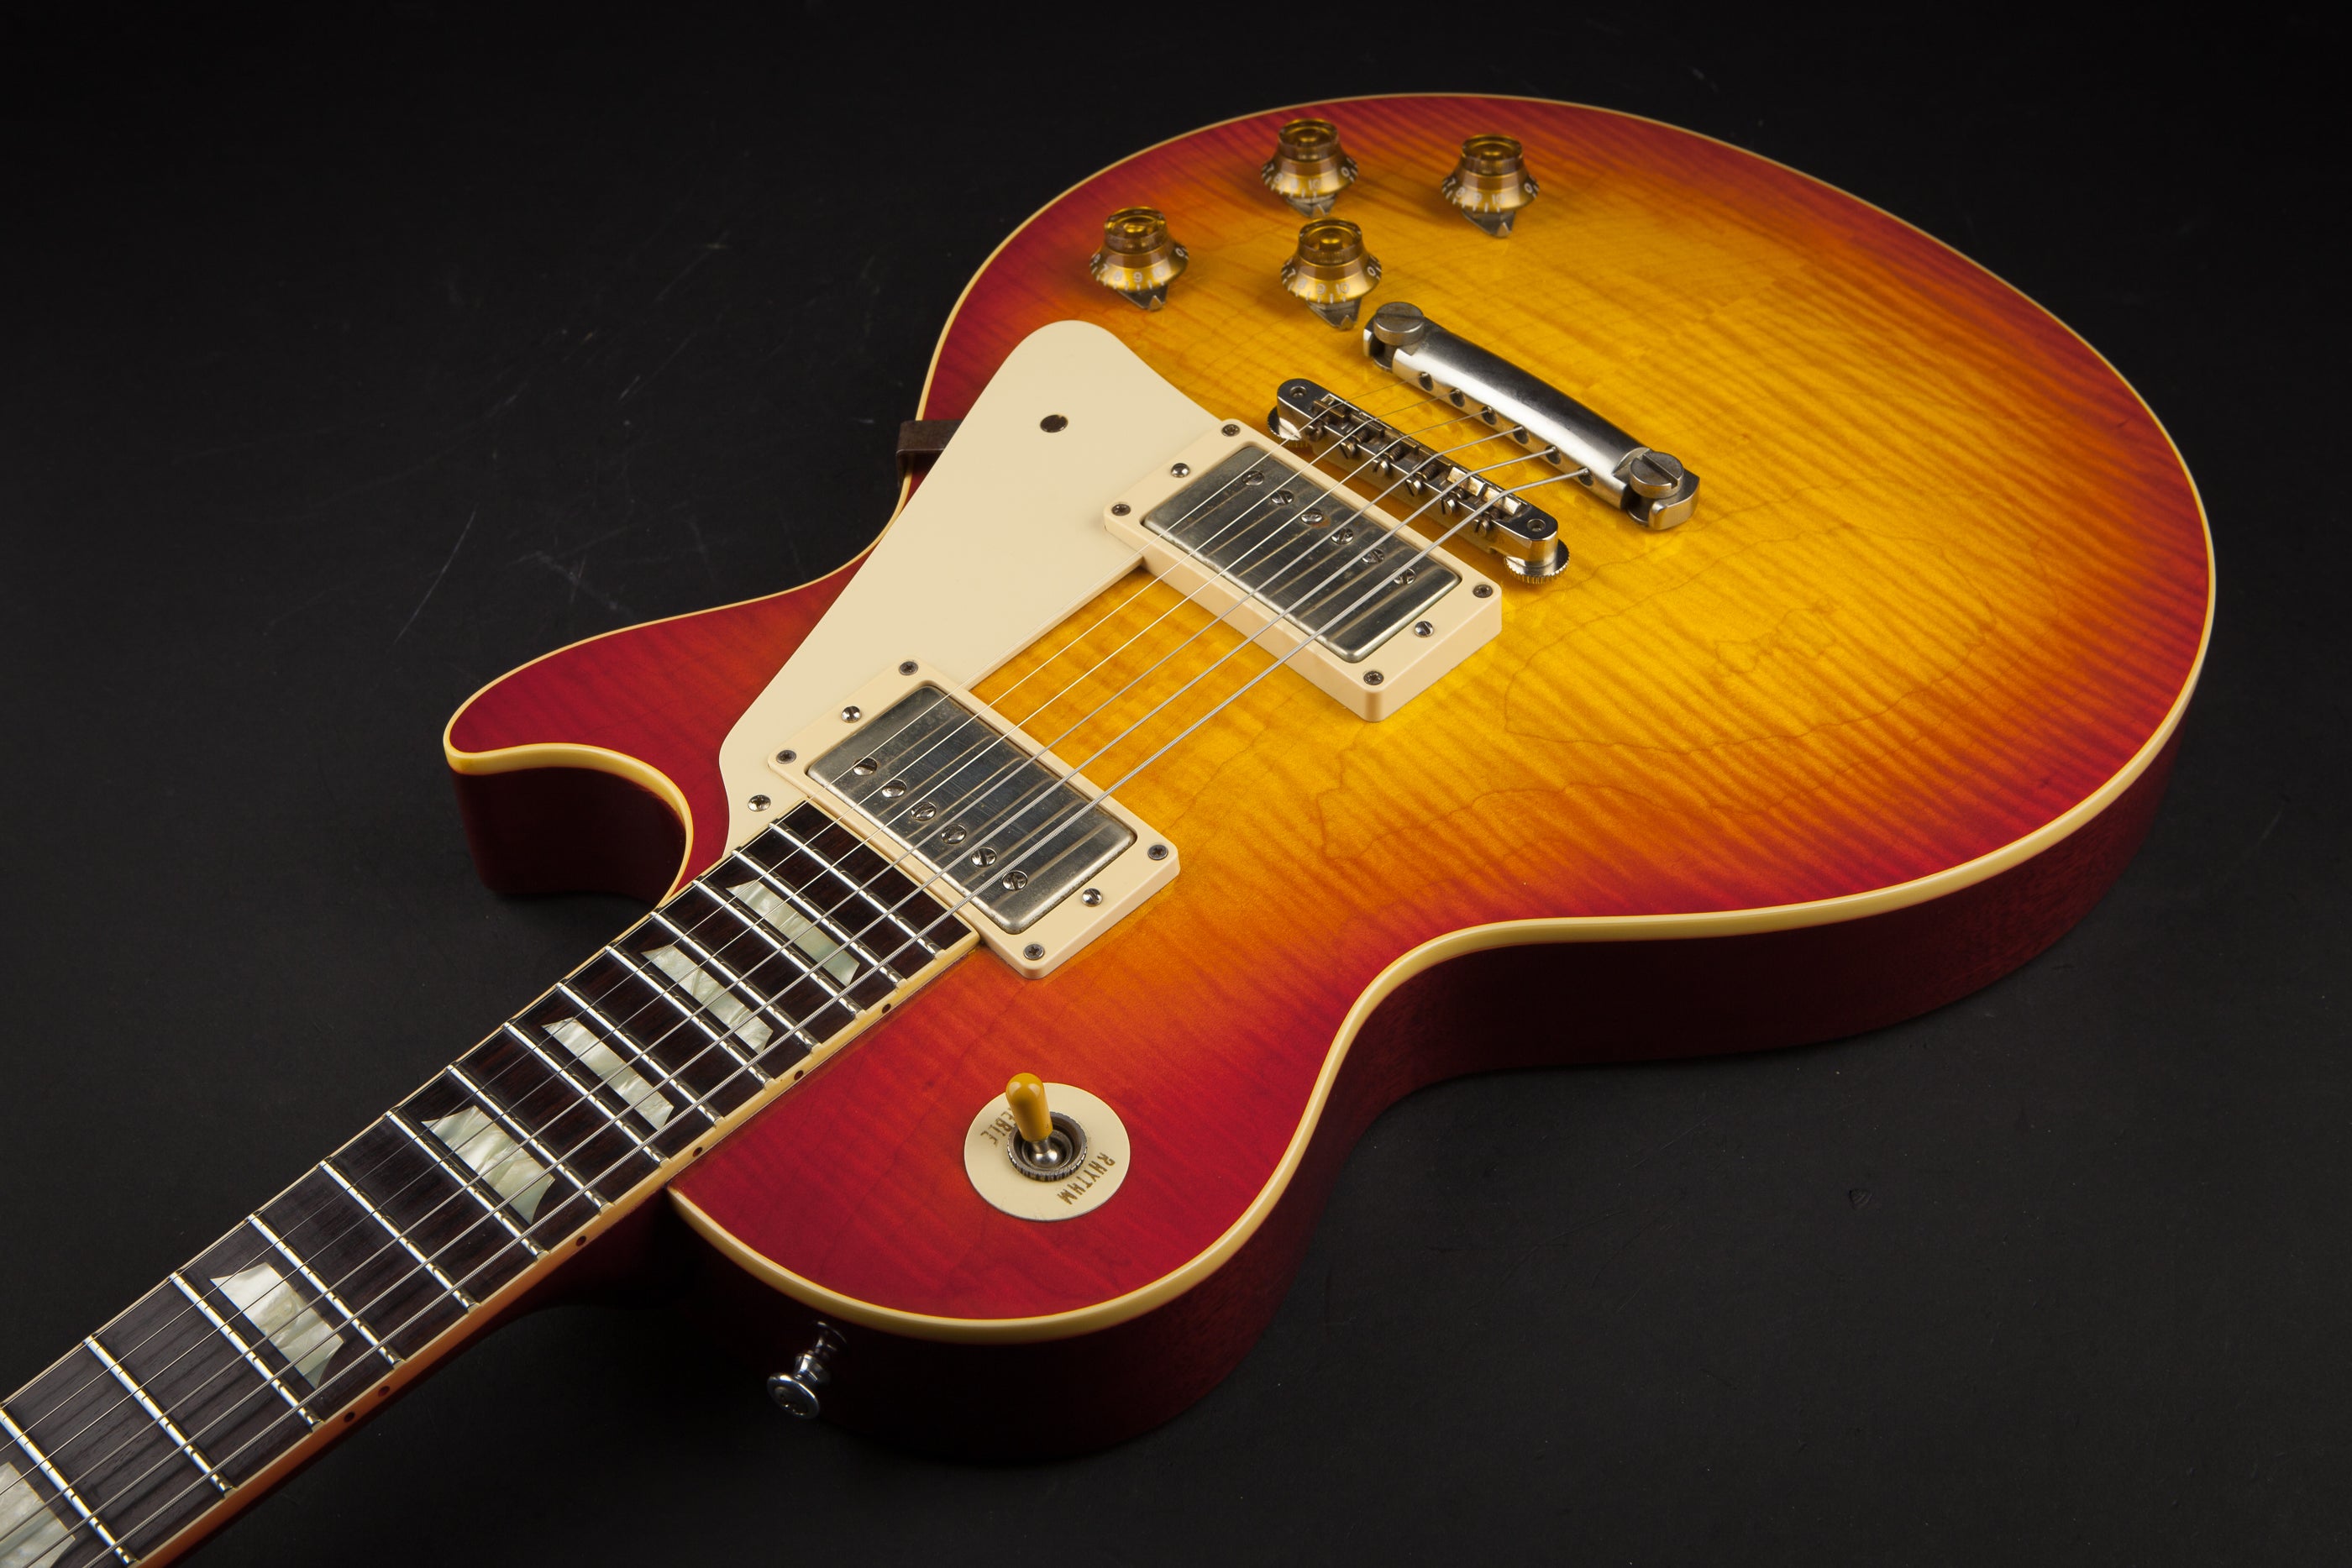 Gibson Custom Shop: Standard Historic VOS 59 Les Paul Washed Cherry #R94268